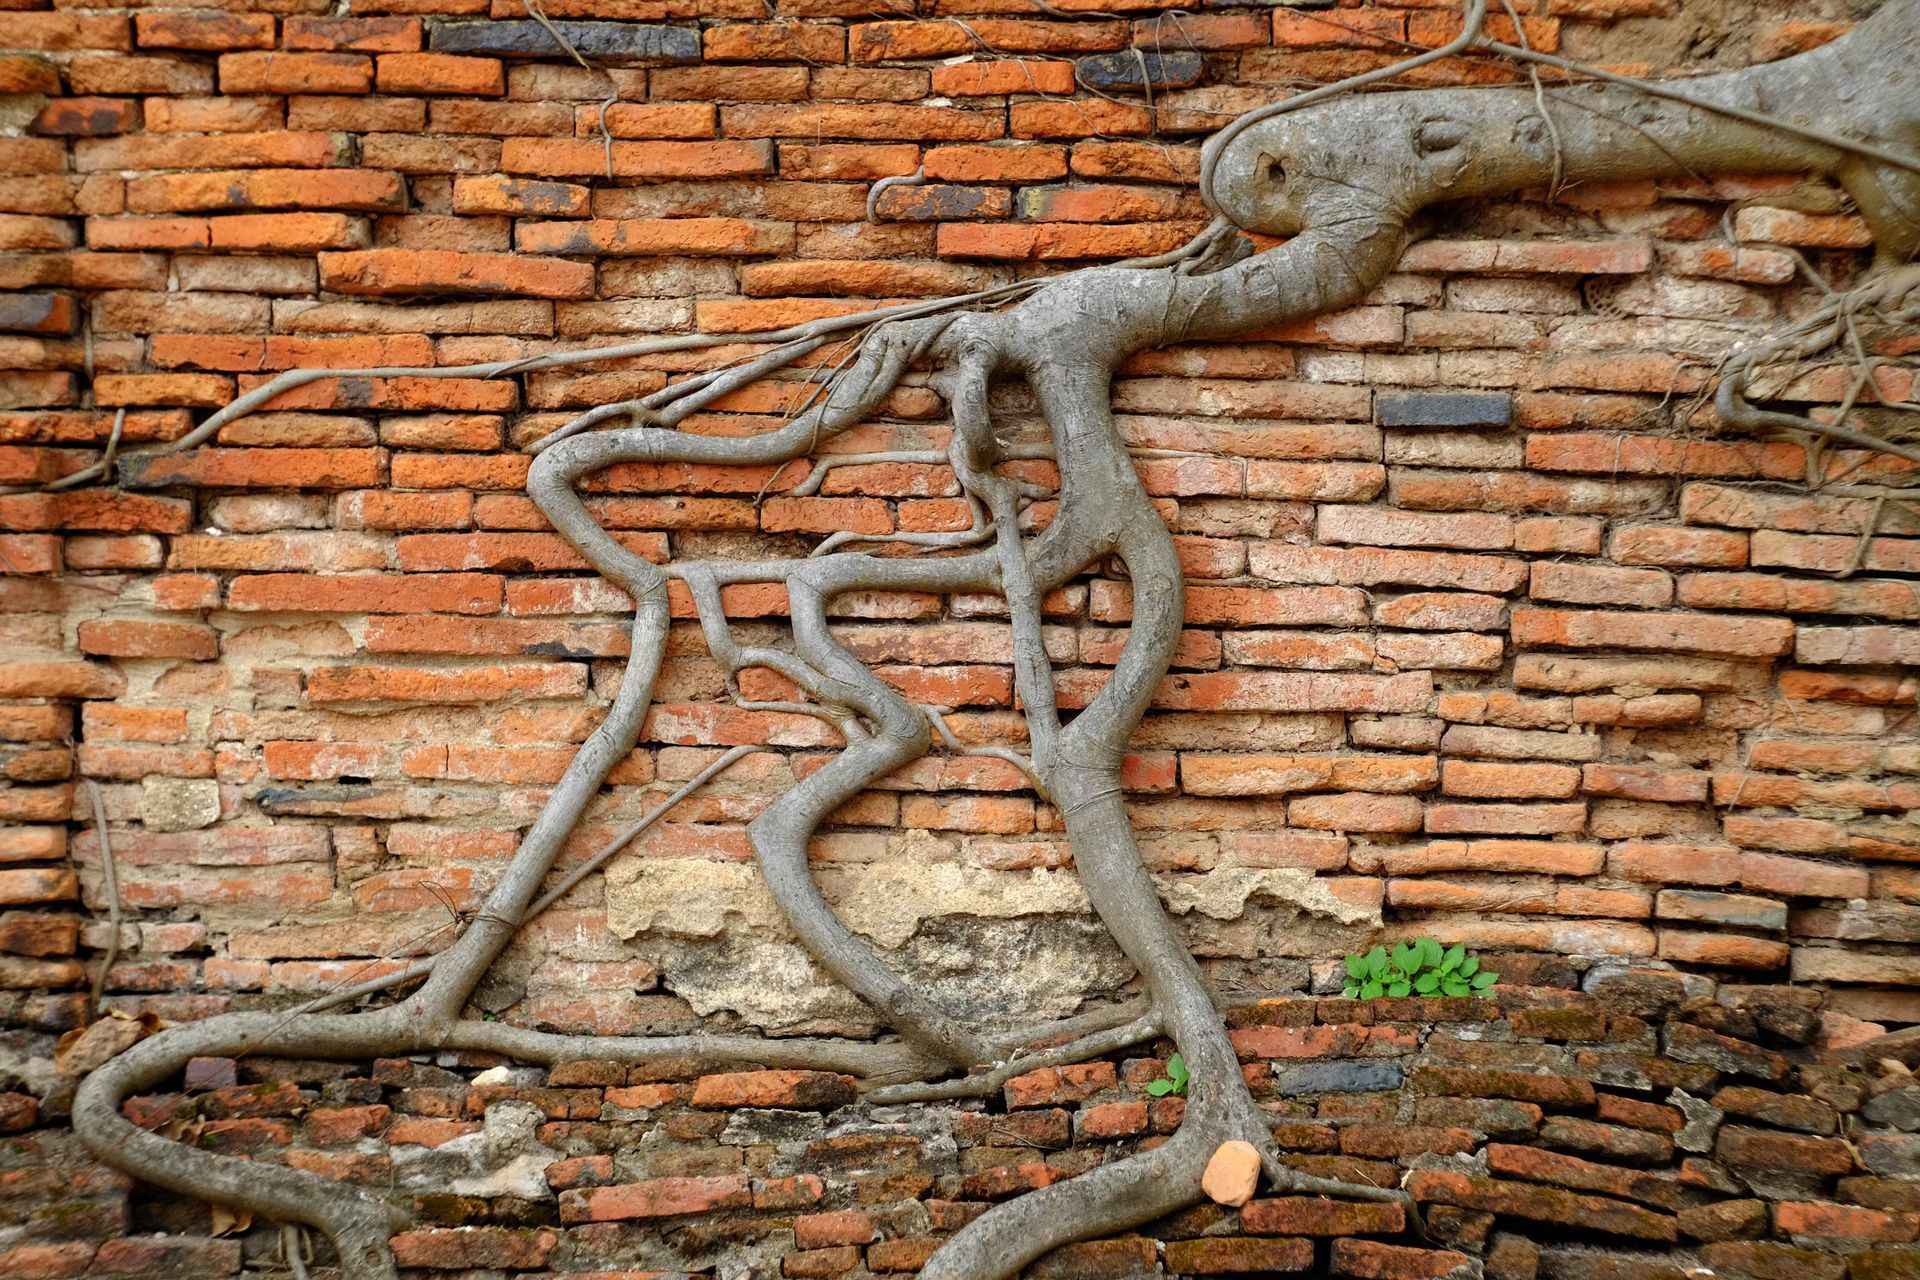 Tree roots encroach and overwhelm a brick foundation.